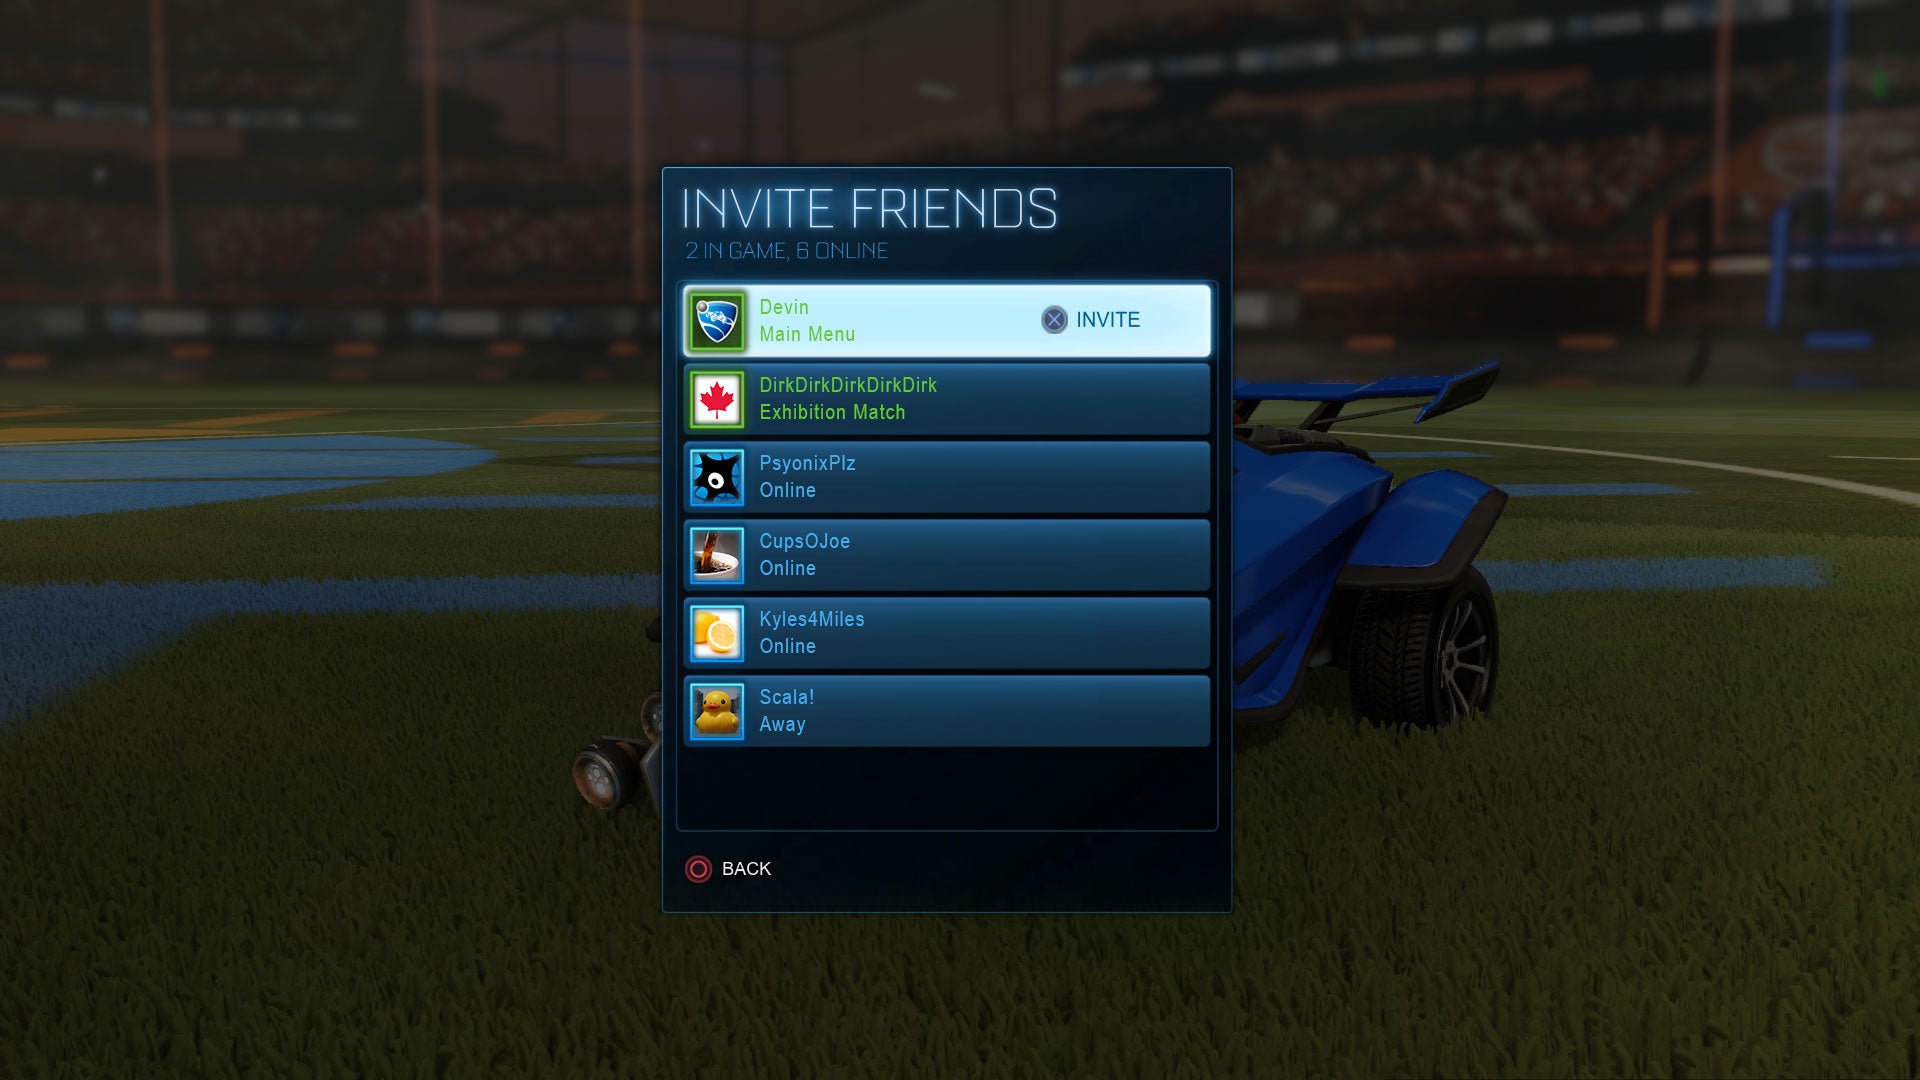 No Shared Items From Rocket League? i thought my RL items would be  available here. didn't they removed Trading for this? : r/RocketLeague